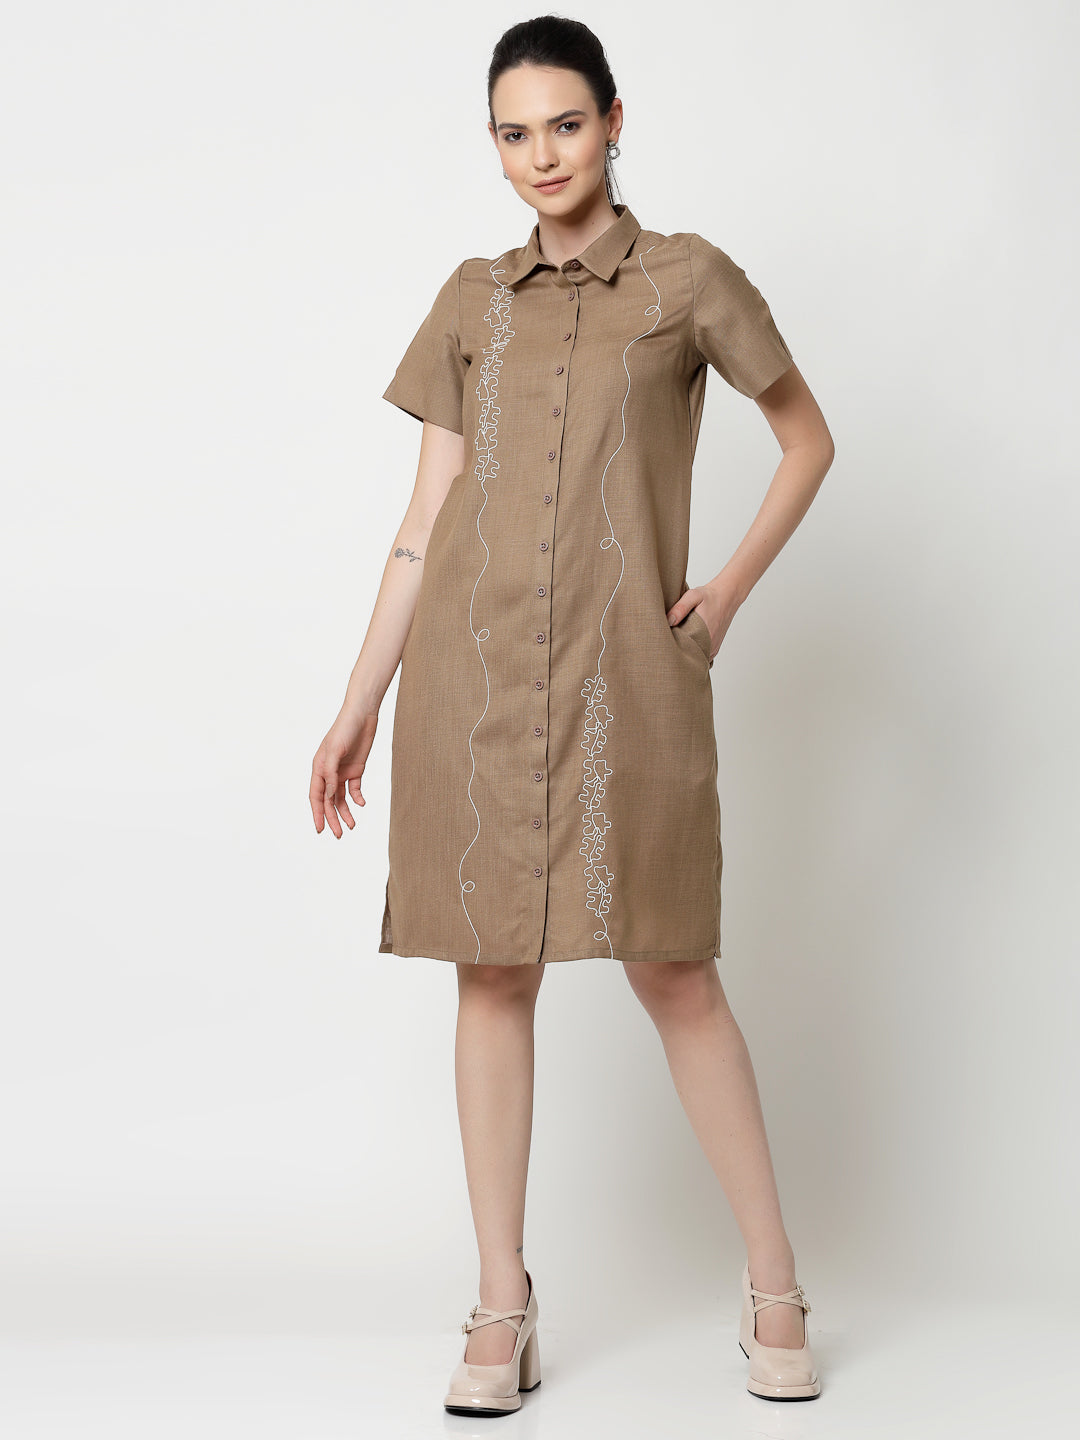 Dark Beige Long Tunic With Puzzle Embroidery